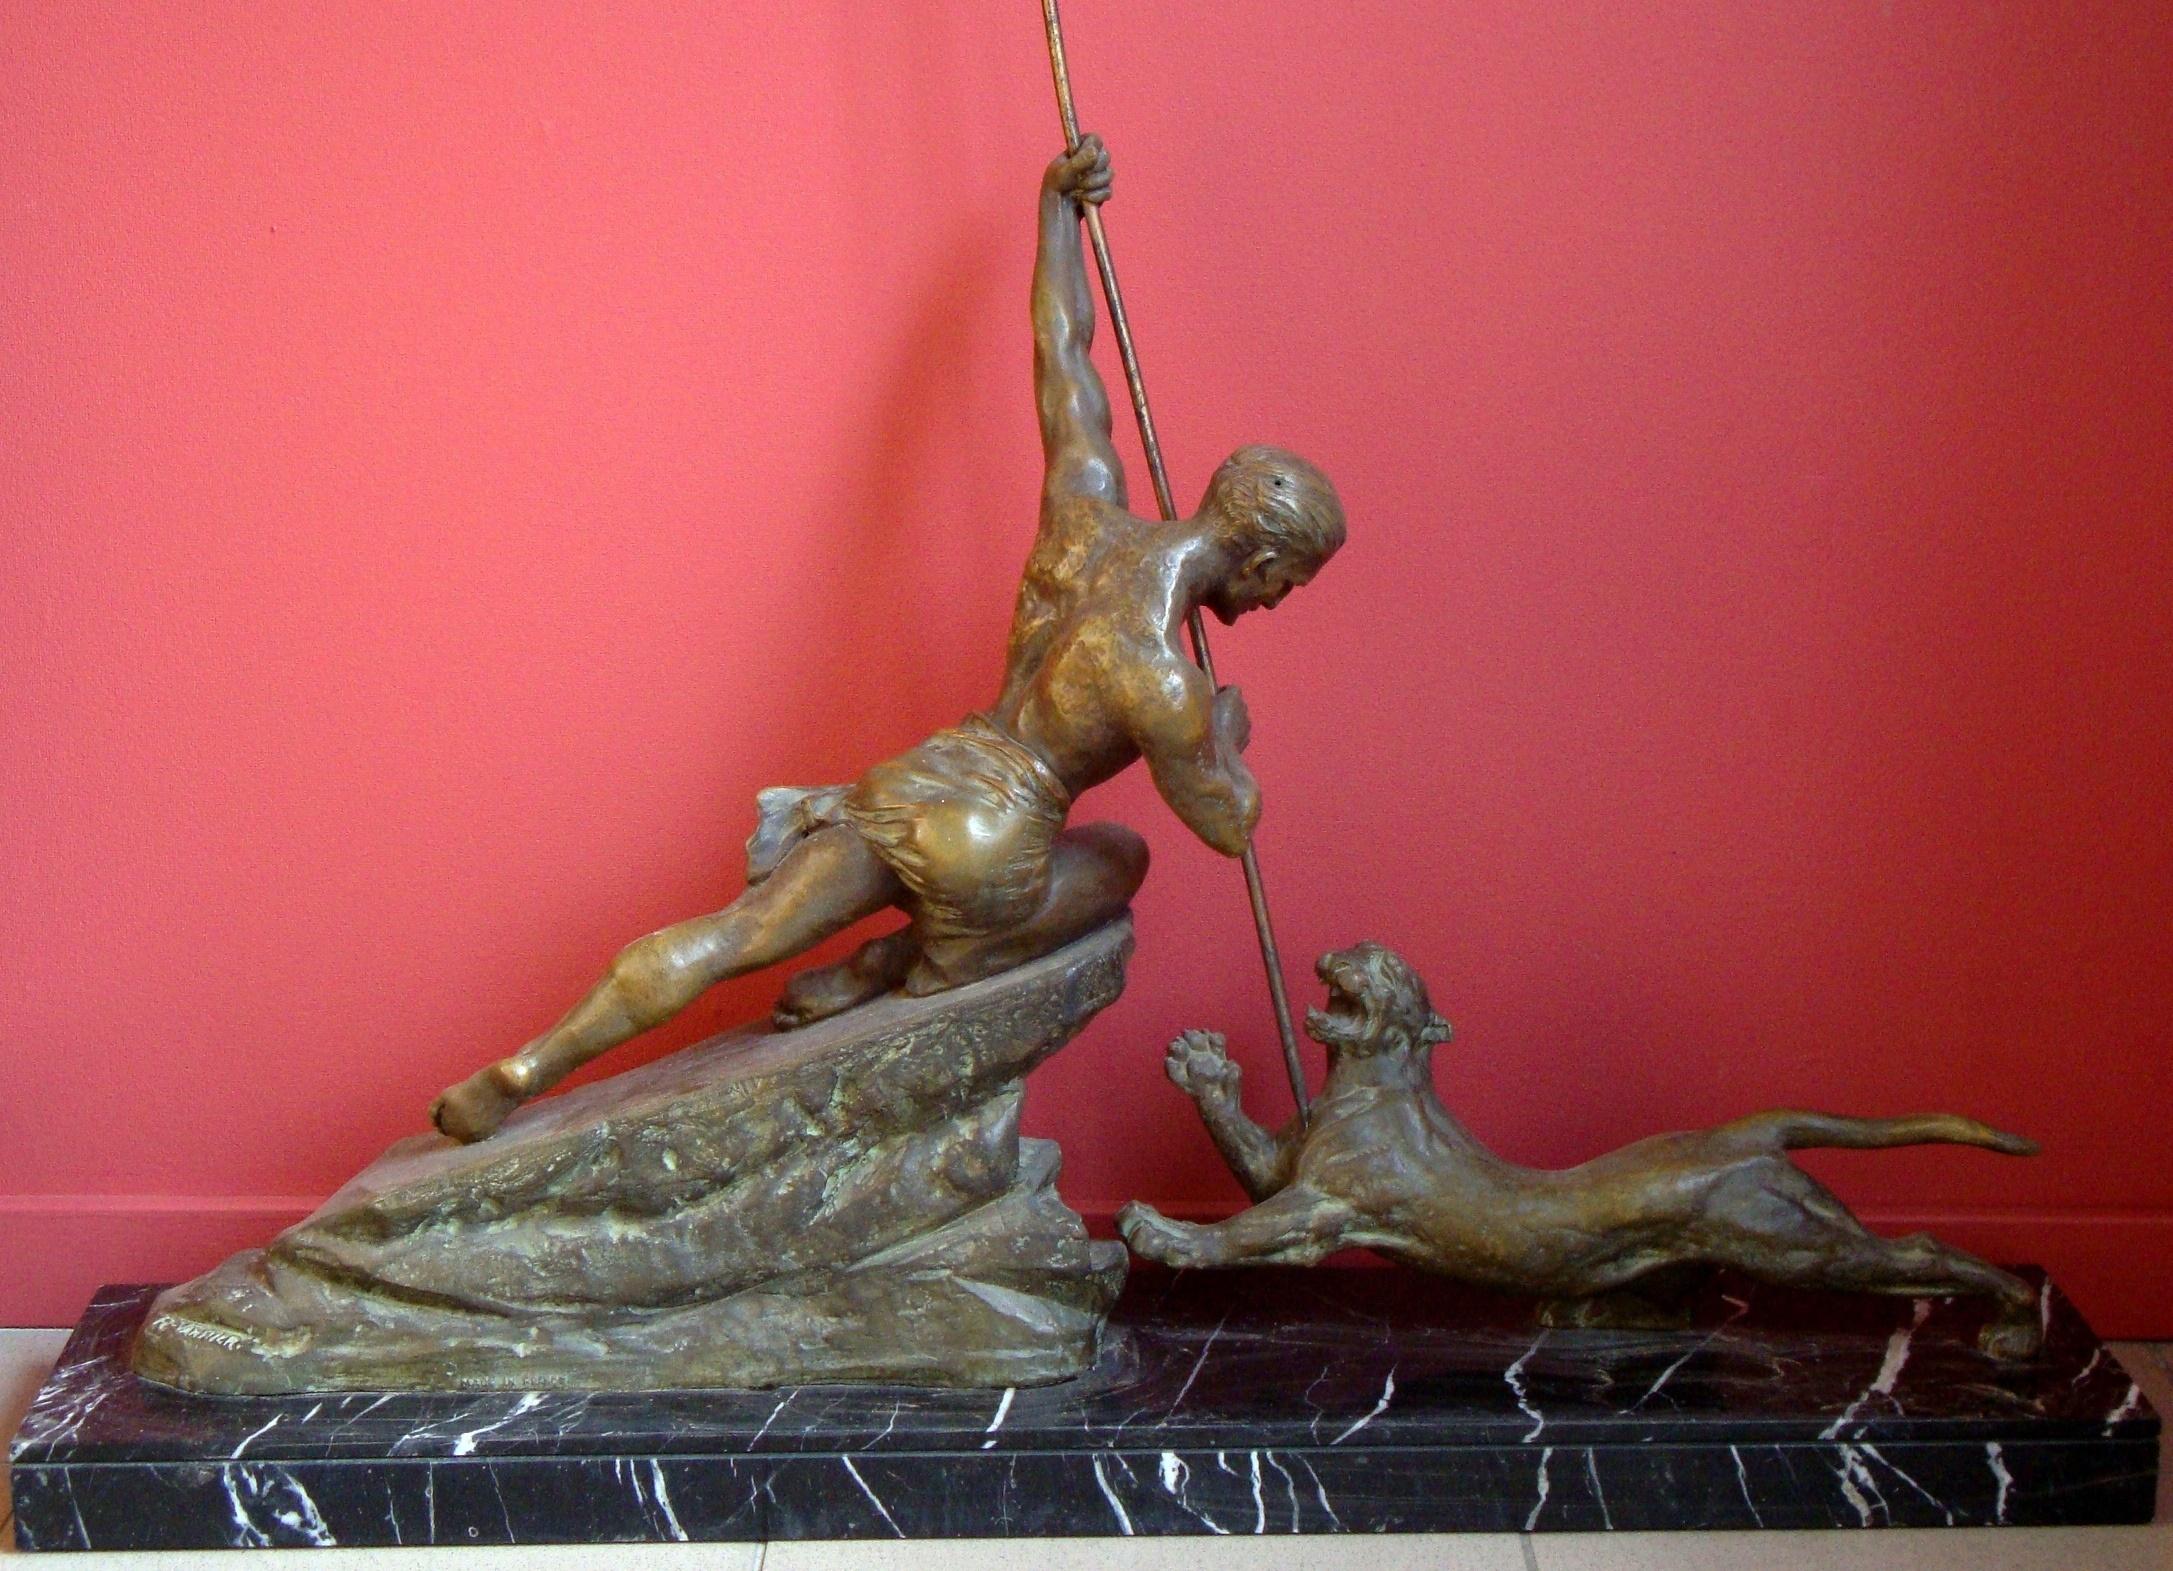 Unknown Figurative Sculpture - Varnier R. - Fight with panther. Bronze, marble, 70x85x17 cm 